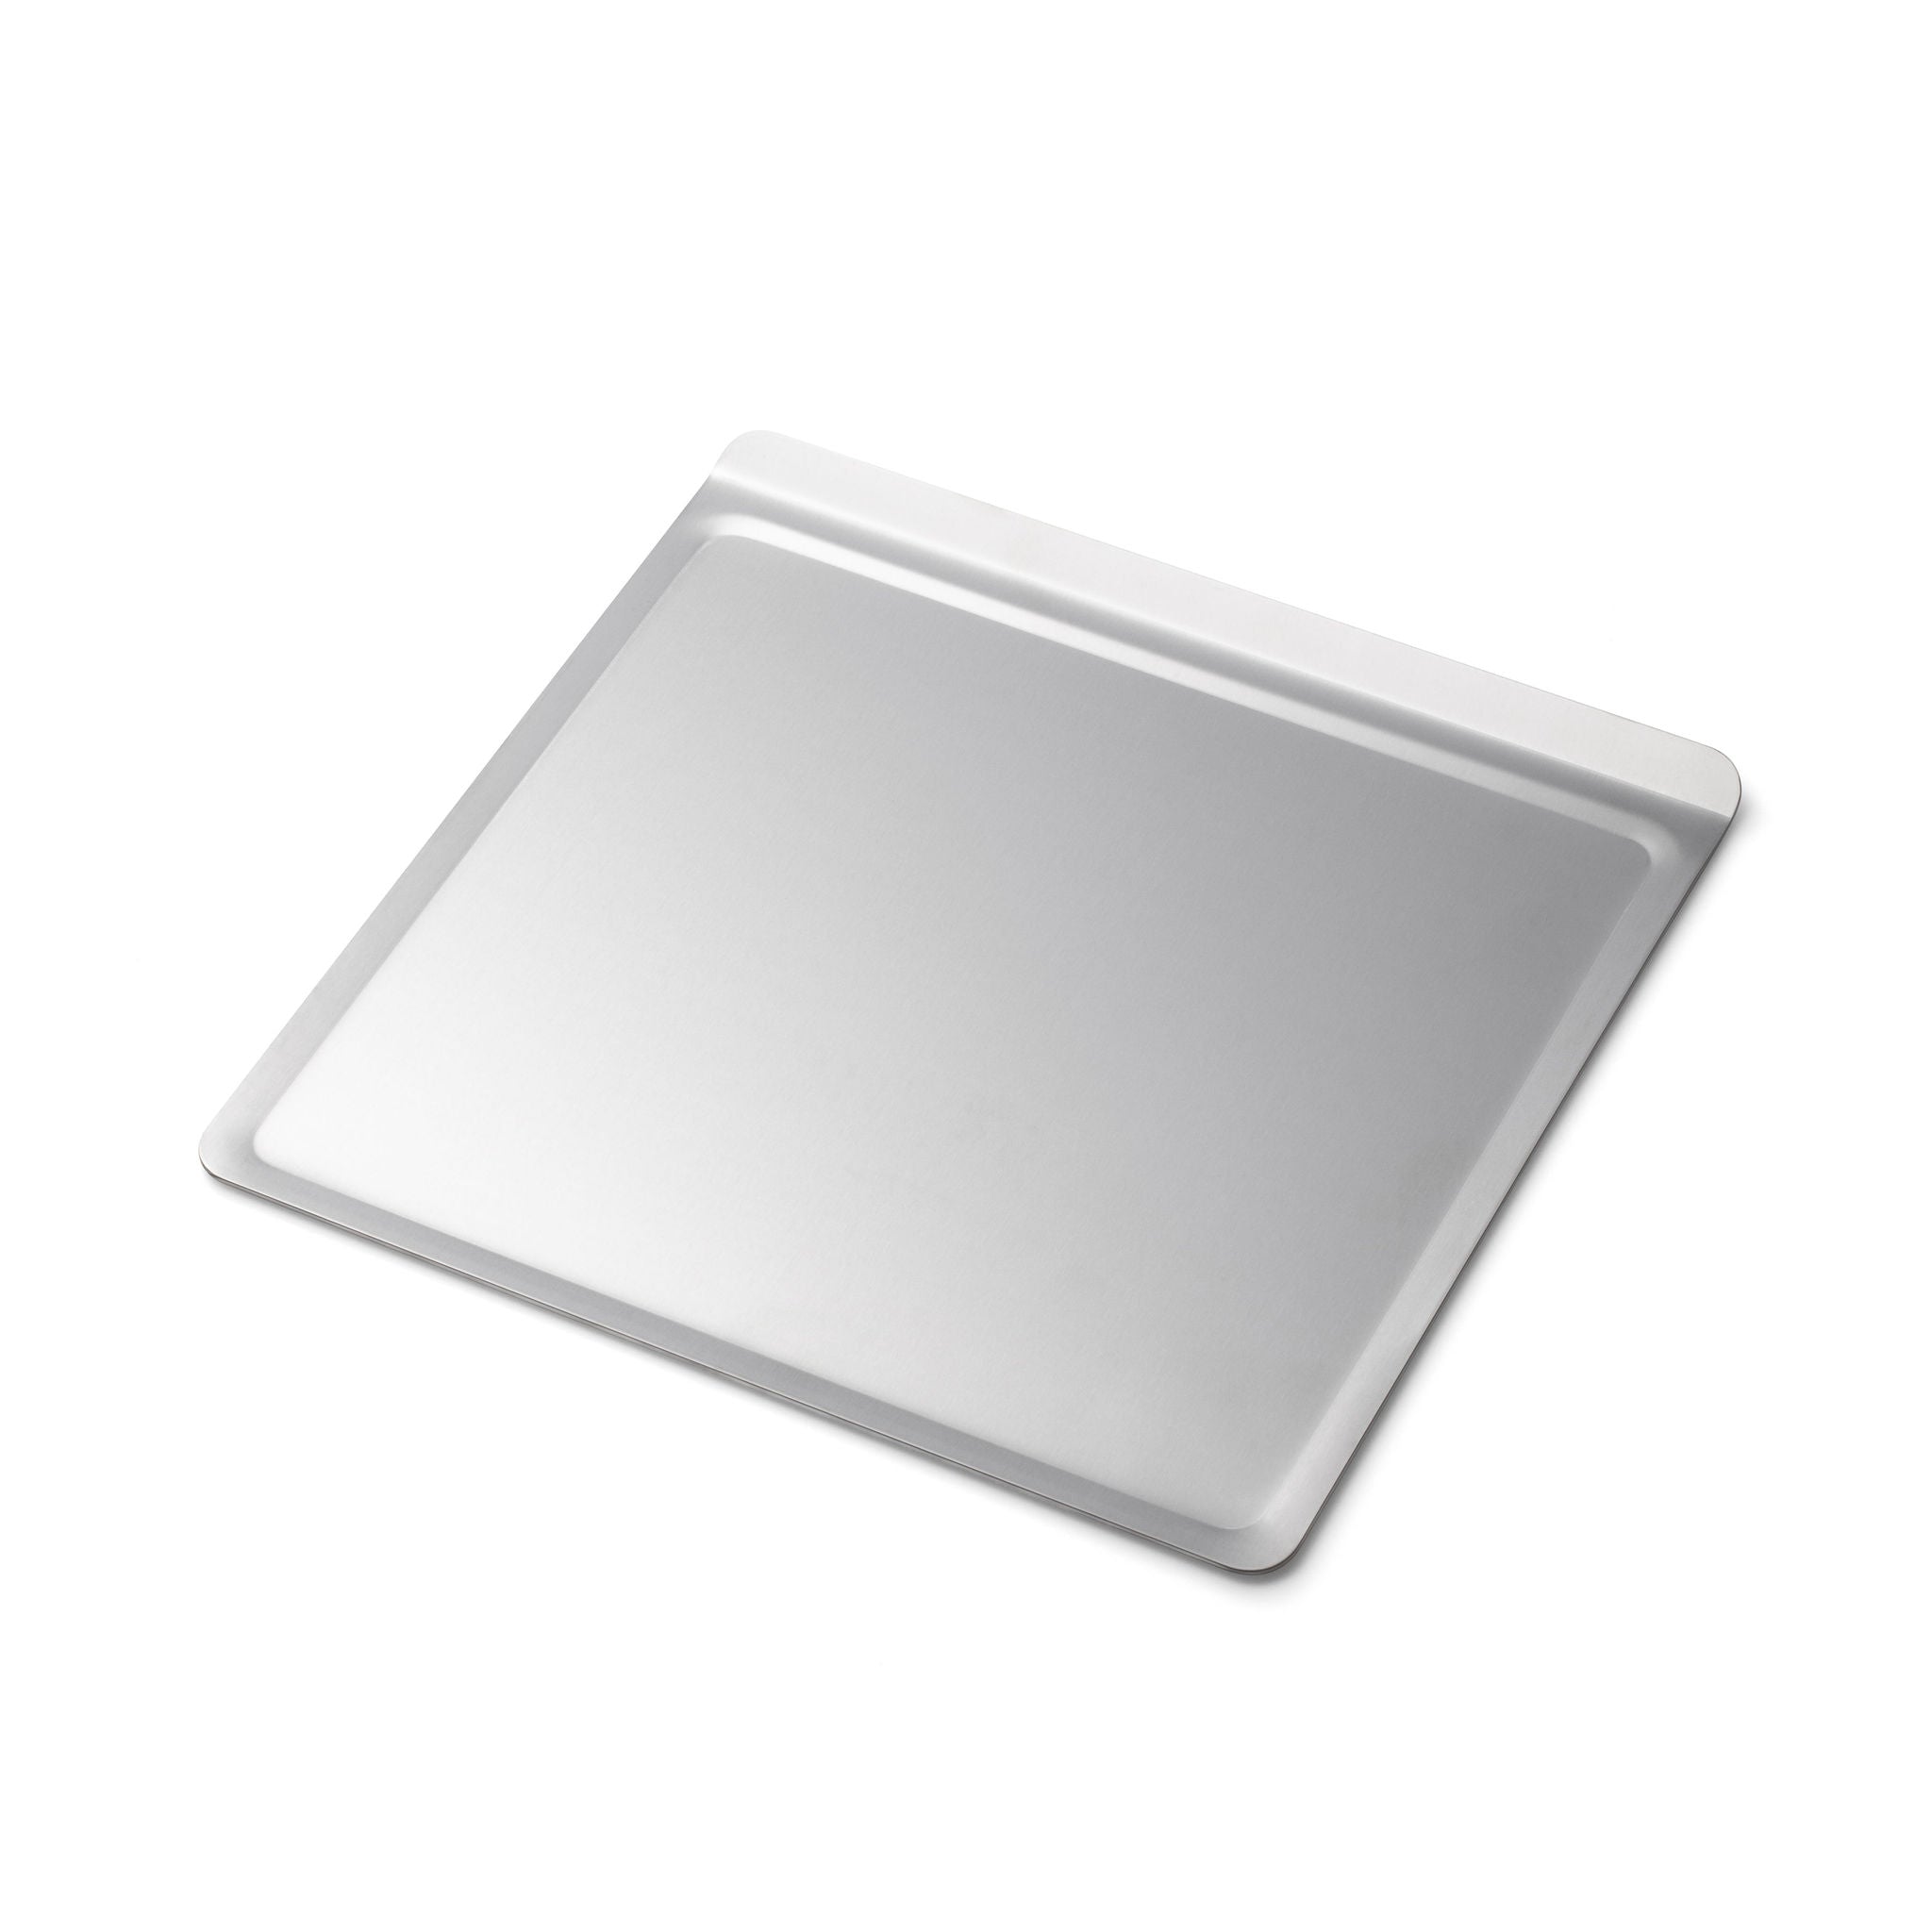 Best baking trays: Why you really need to pay more than this for a